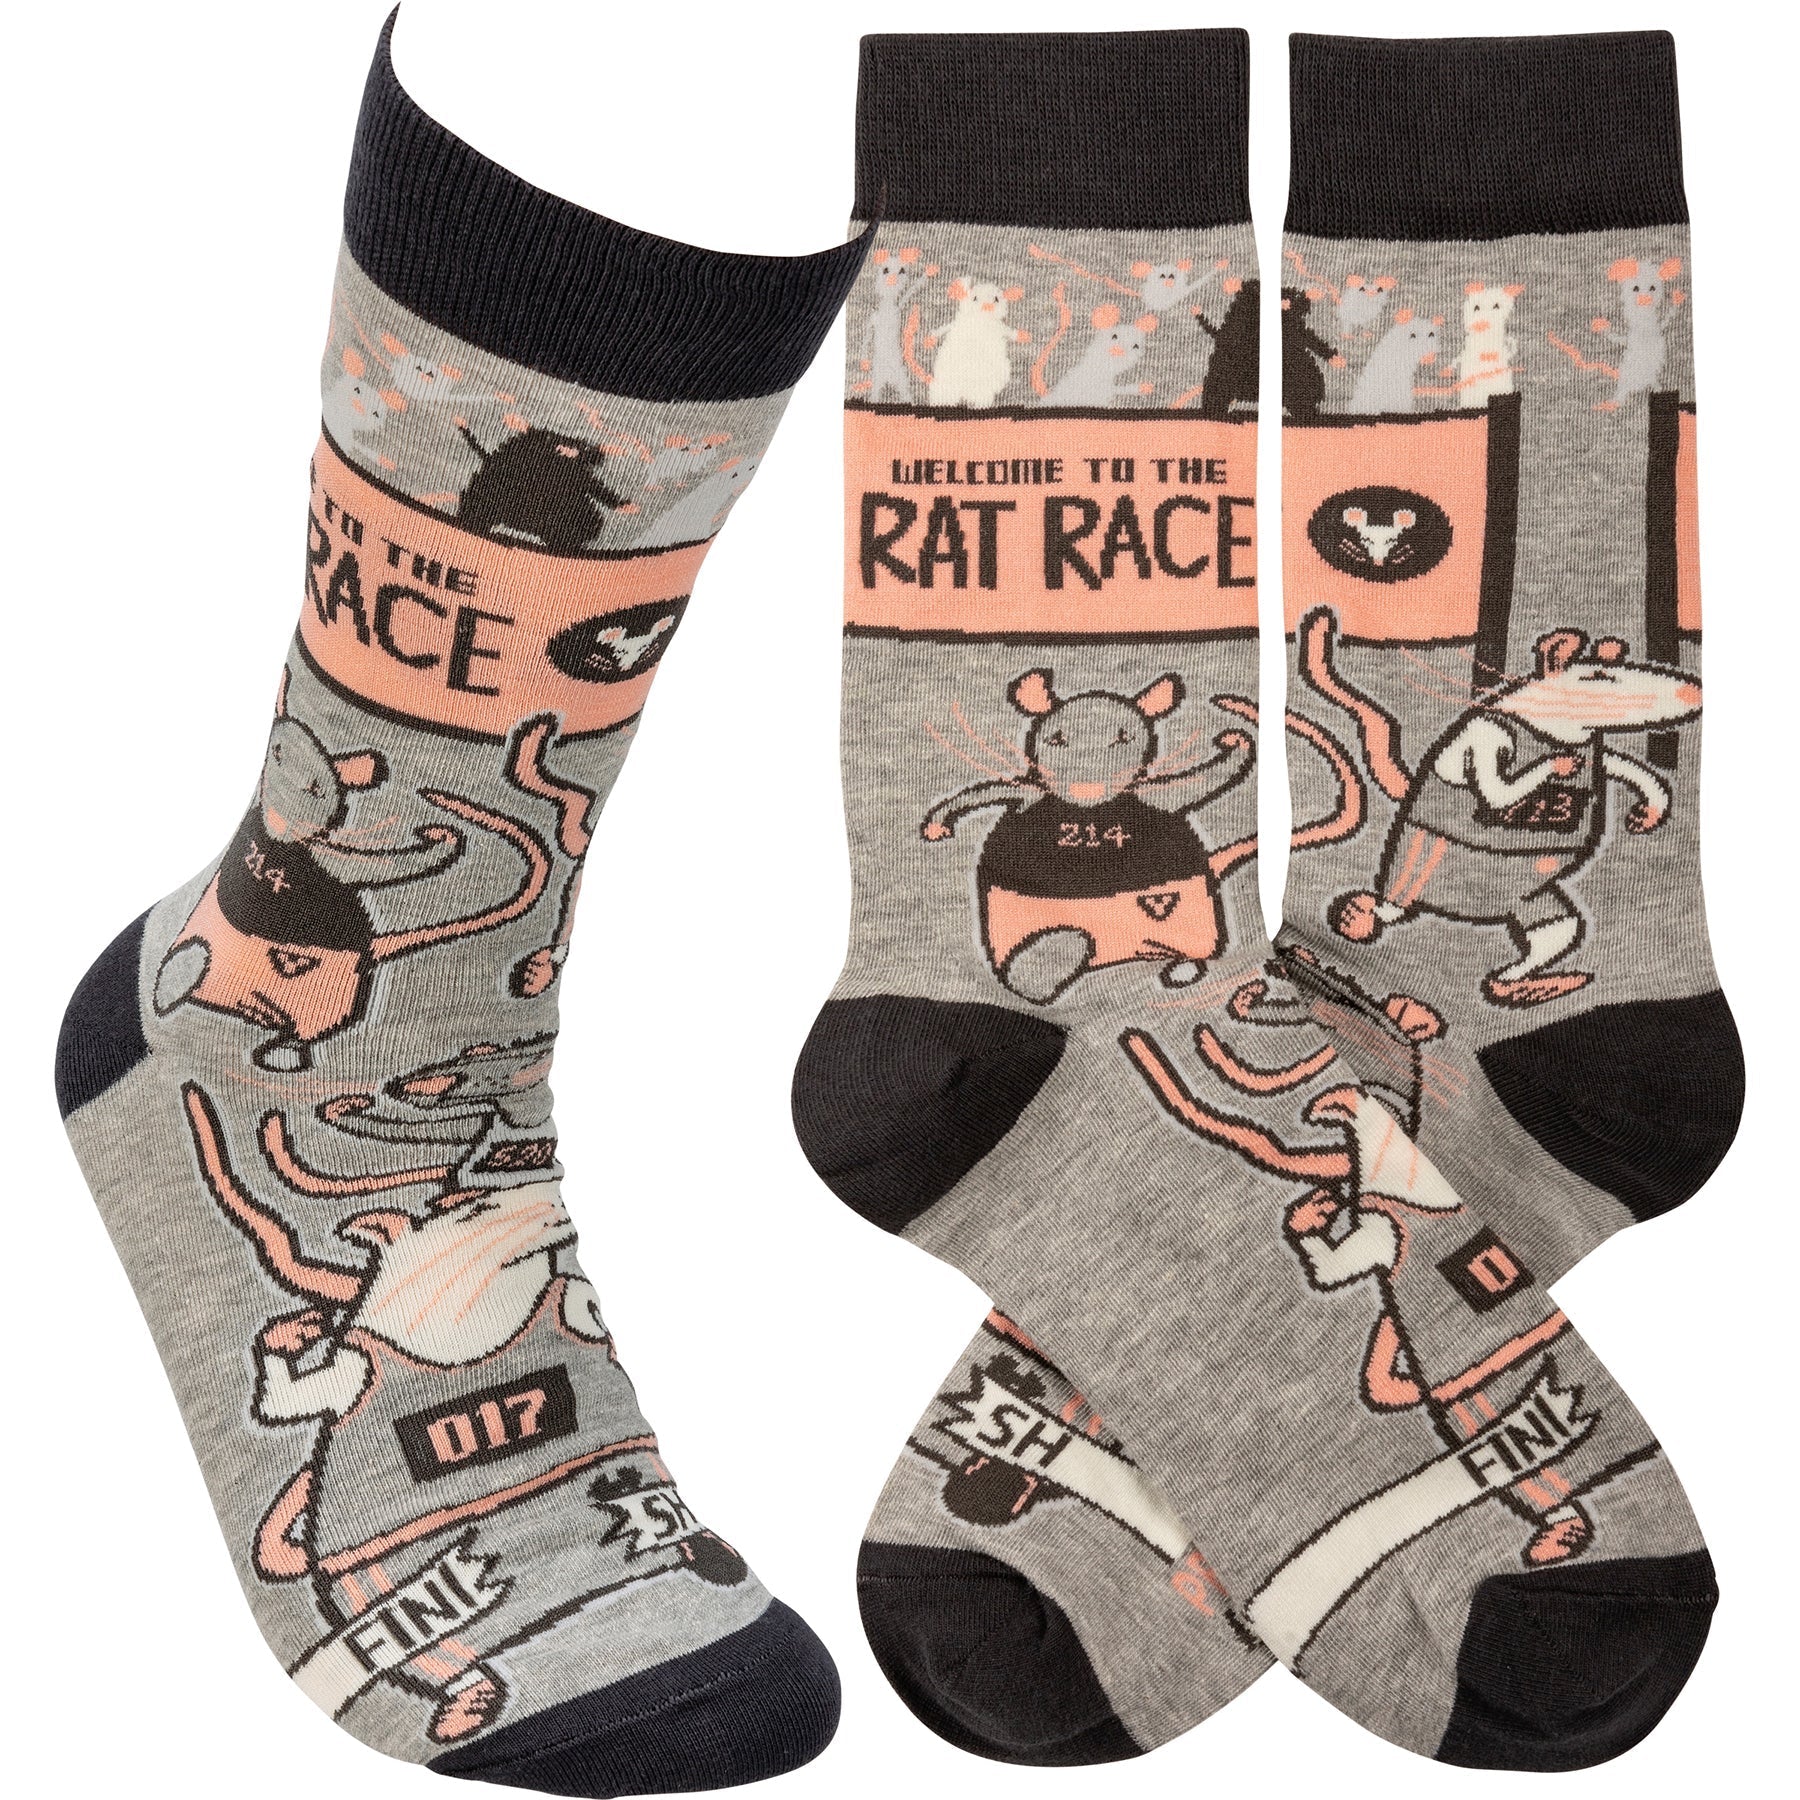 Welcome To The Rat Race Funny Socks in Gray | Unisex